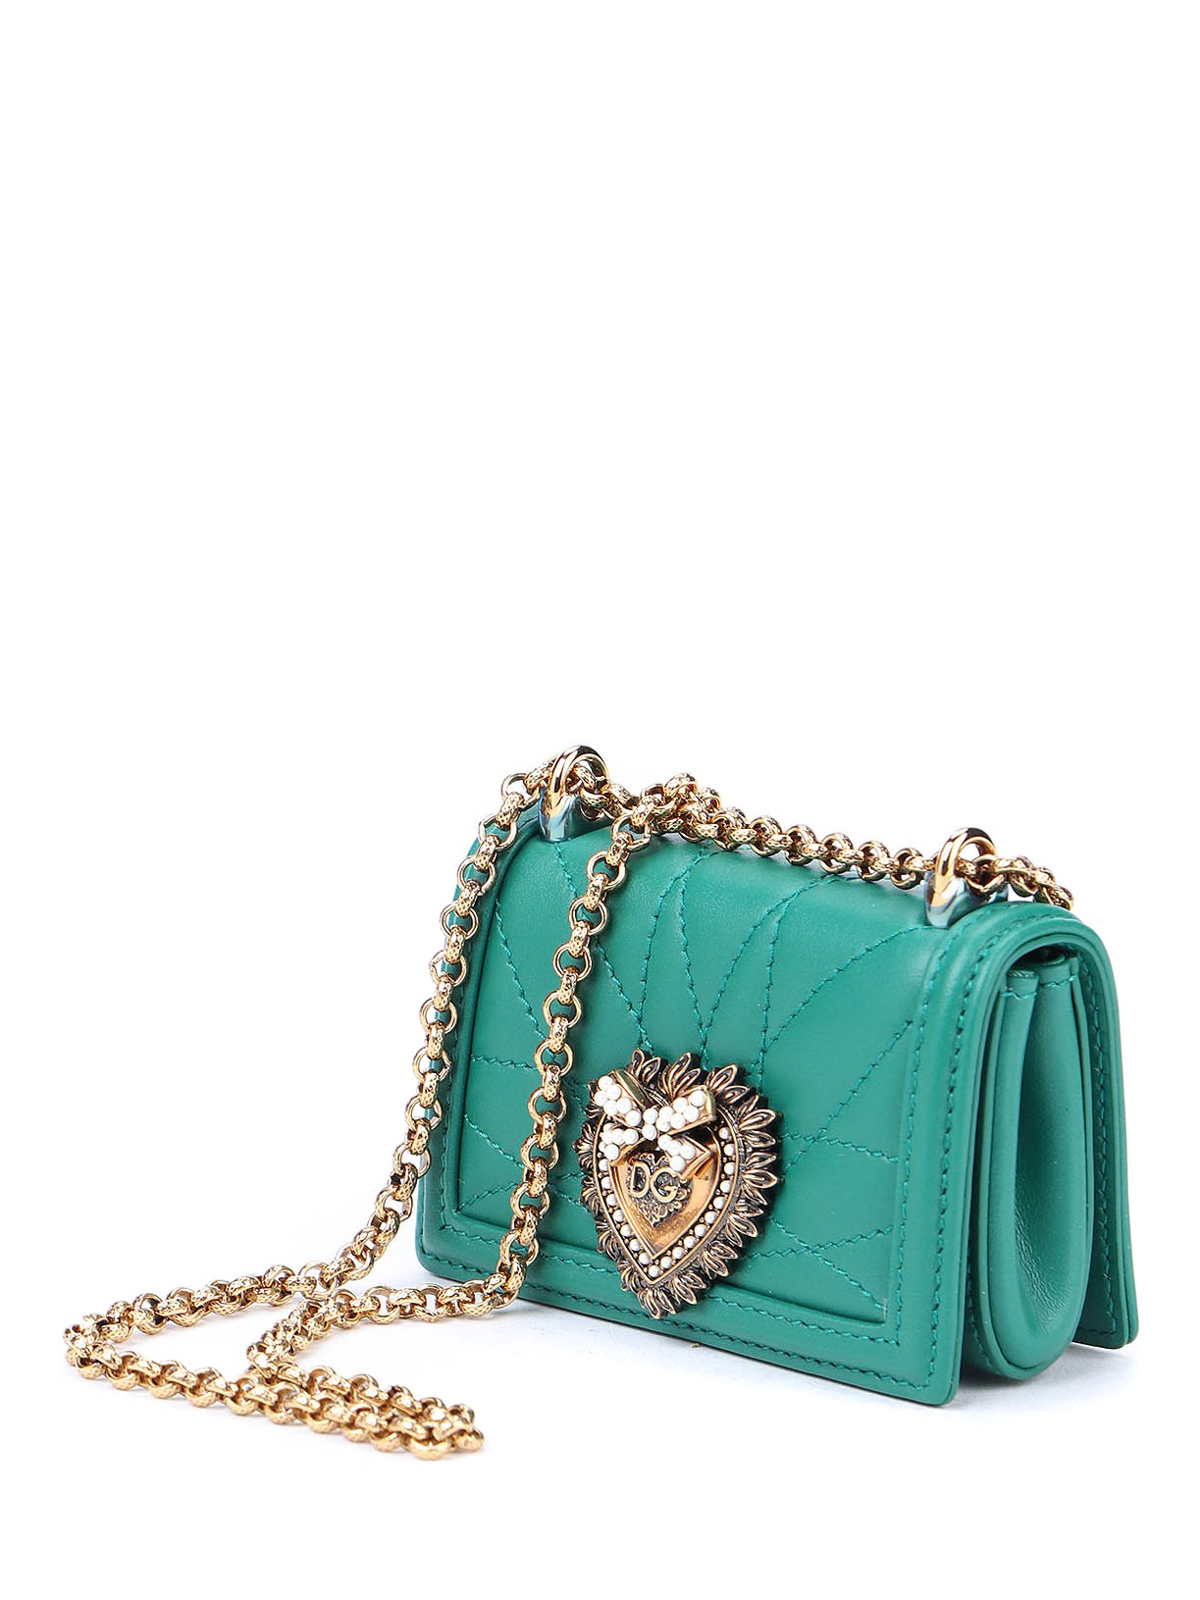 Devotion Micro Bag In Quilted Nappa Leather by Dolce & Gabbana at